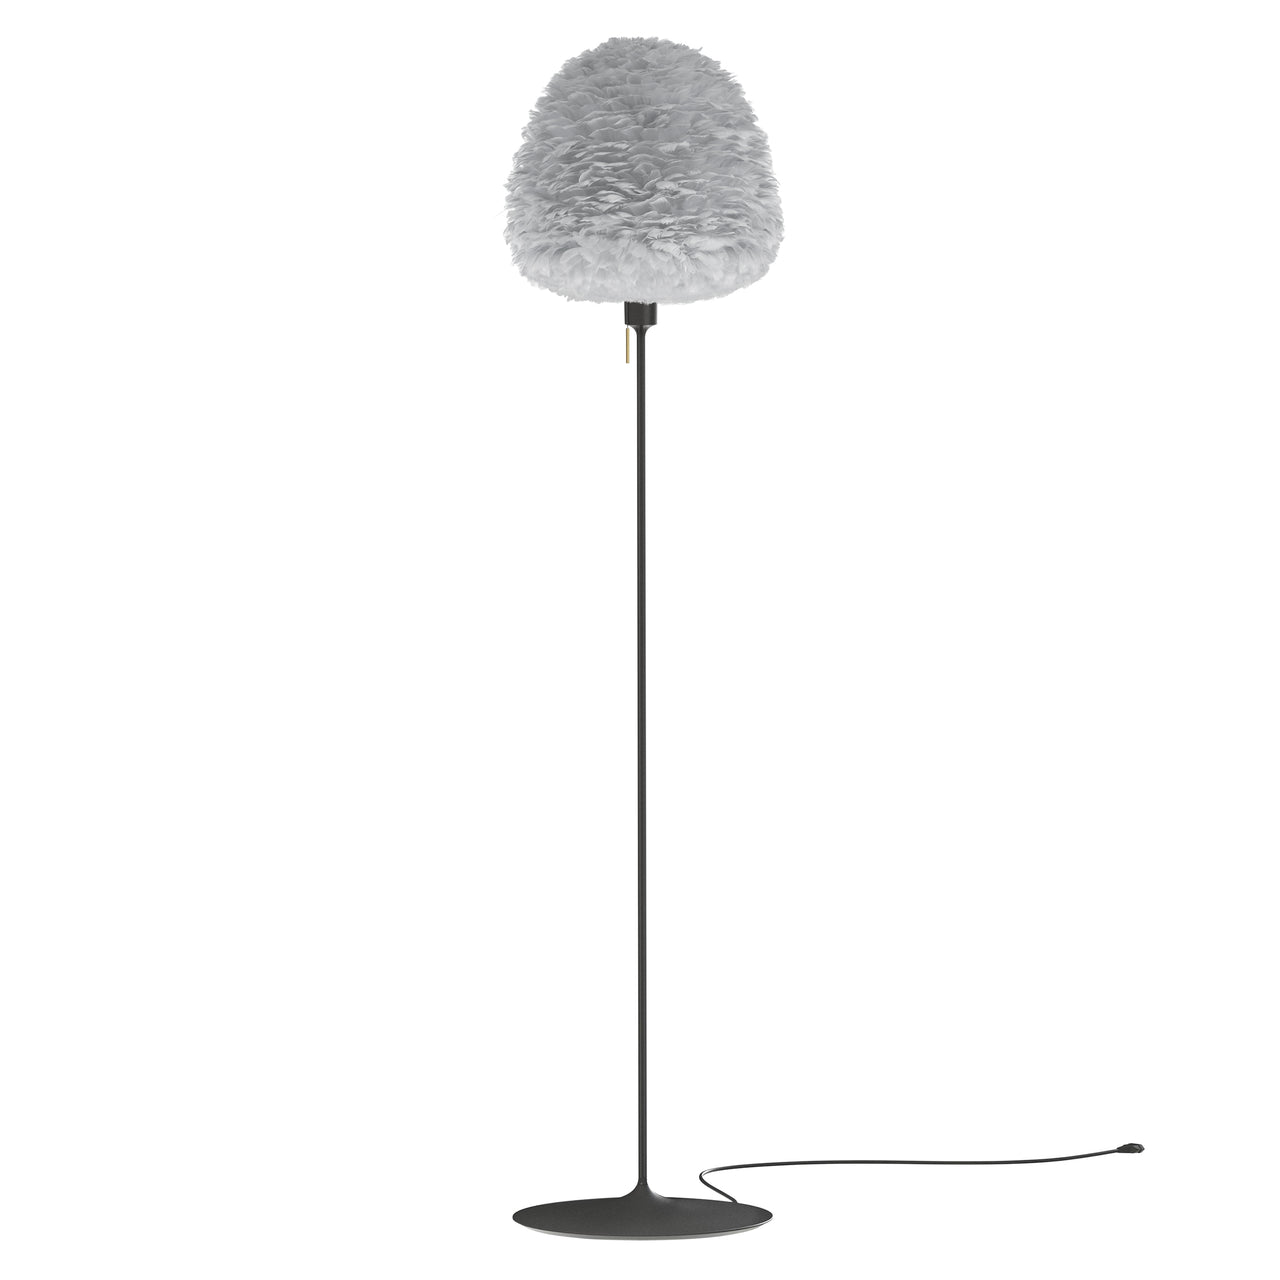 Eos Evia Champagne Floor Lamp: Large - 21.7